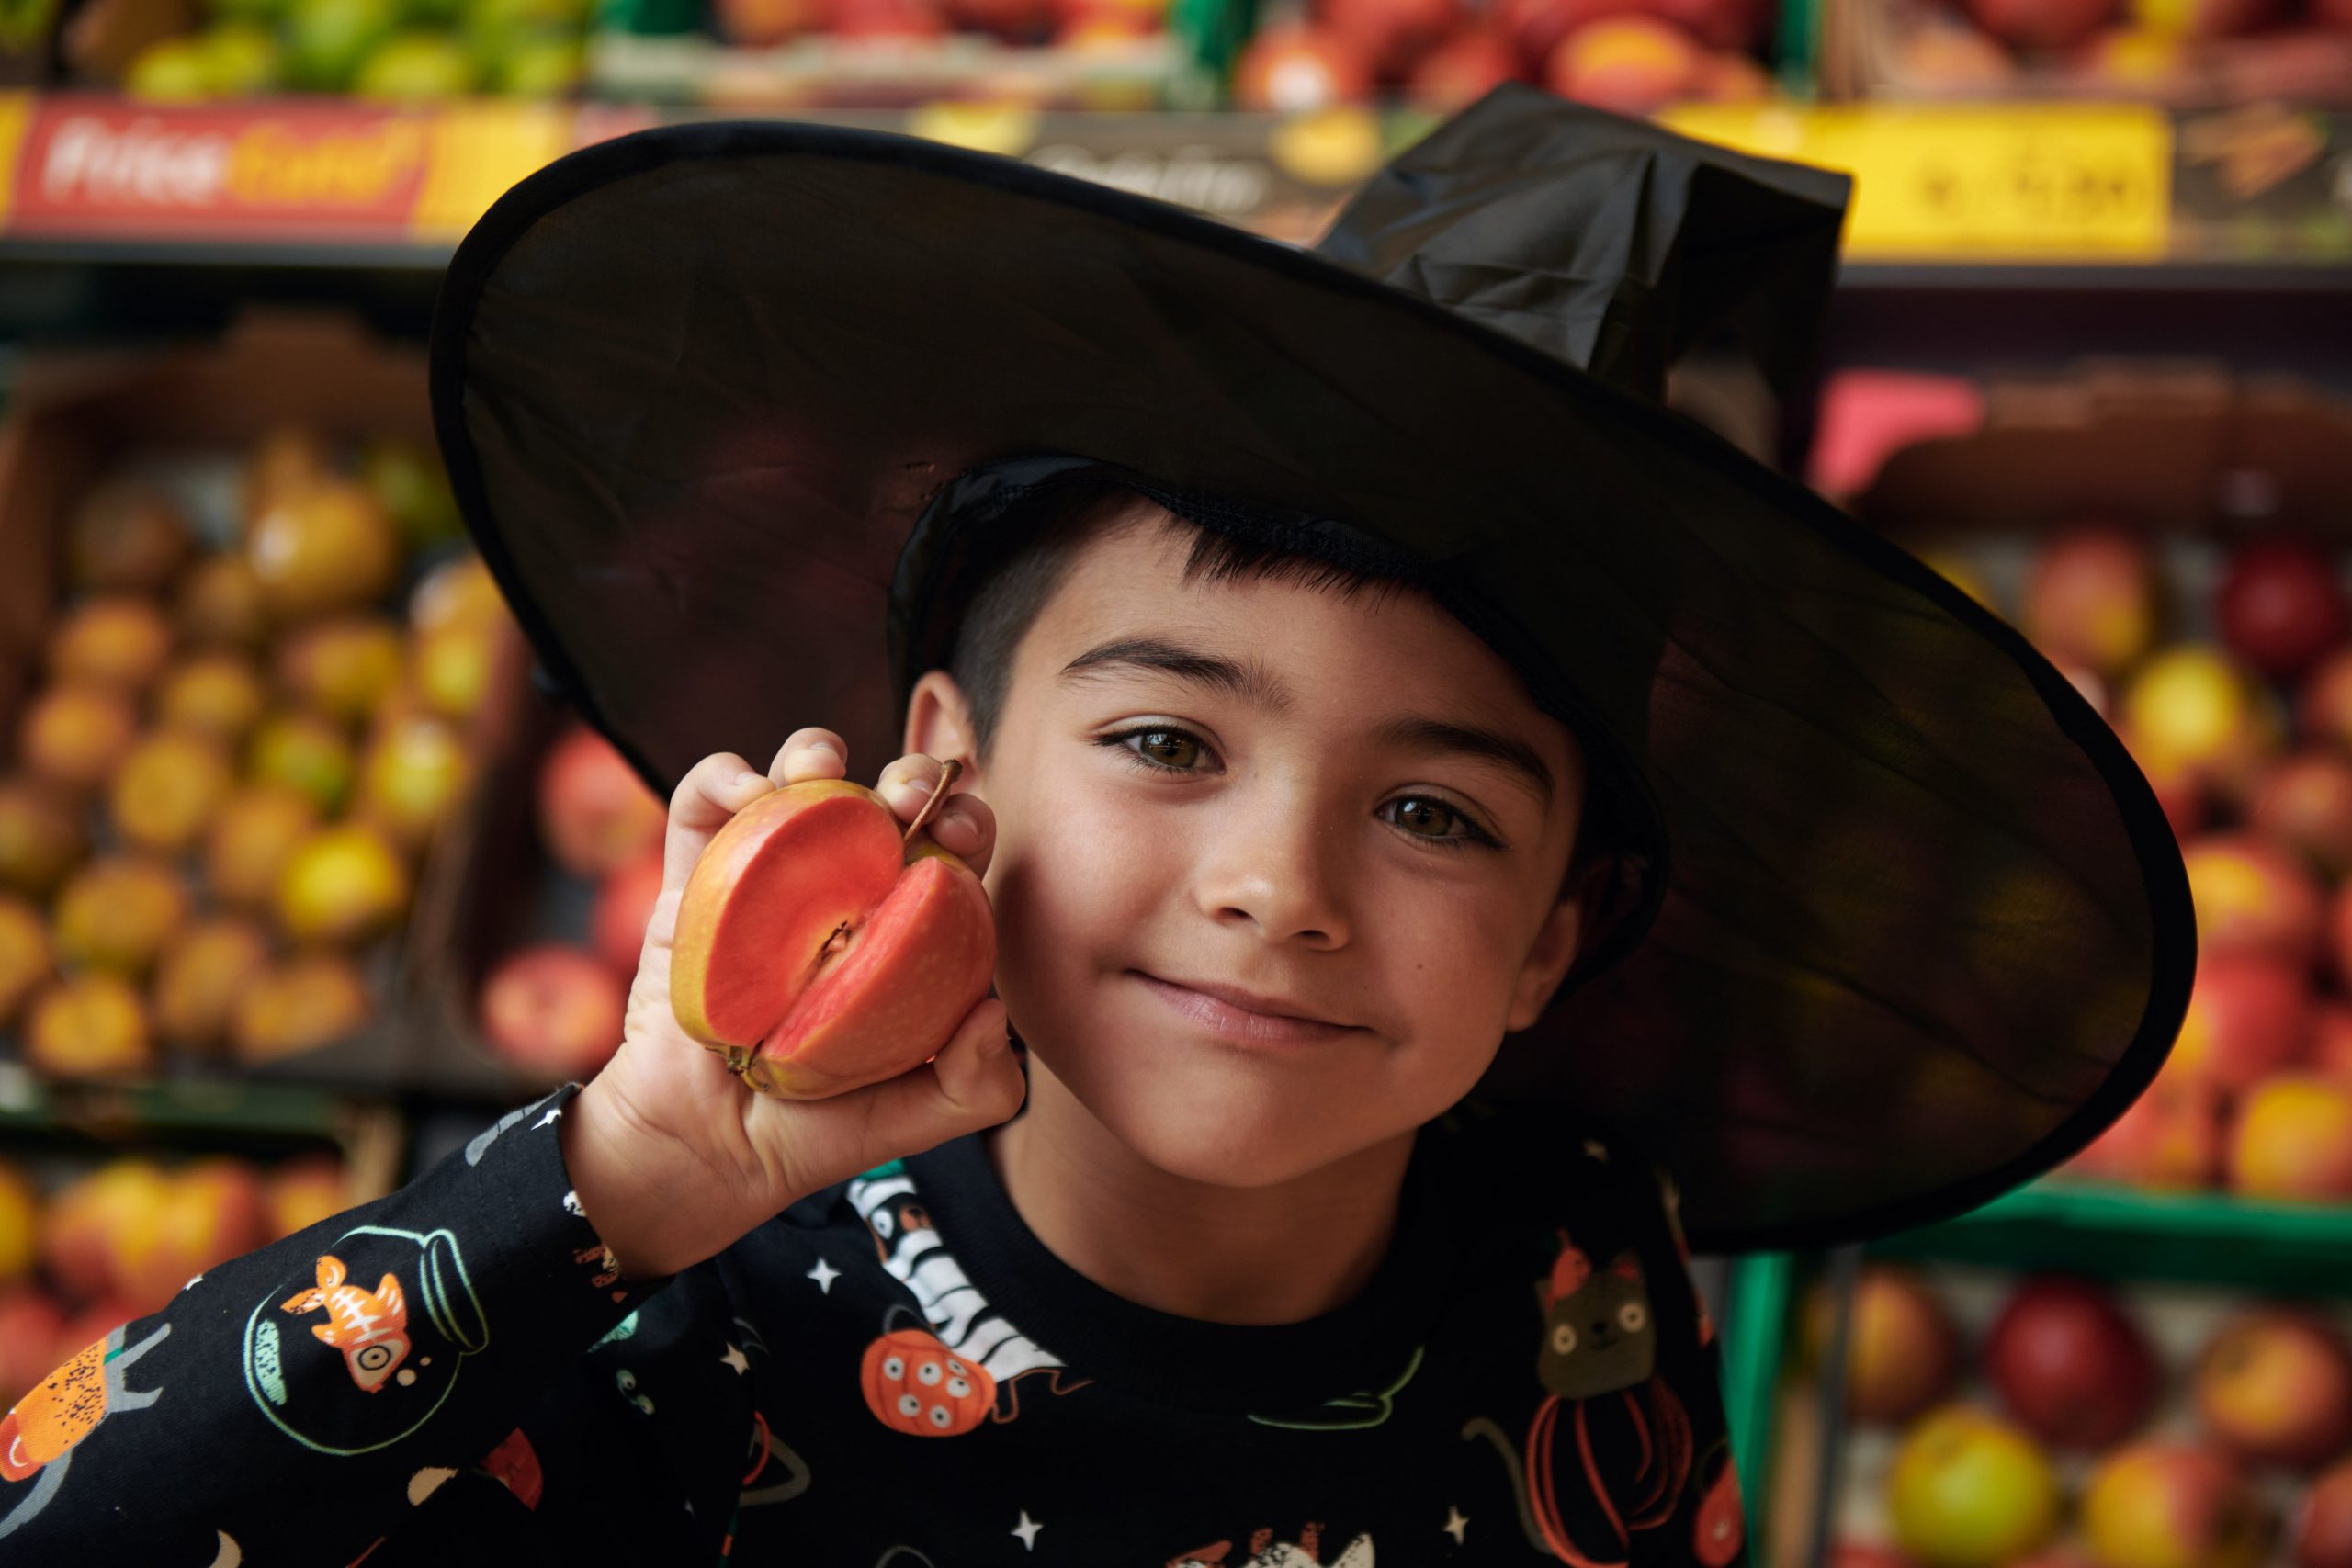 Promotion campaigns made by Morrisons with Kissabel apples. A child holding an appel, dressed like a wizard, in a retail store. Copyright: Morrisons.